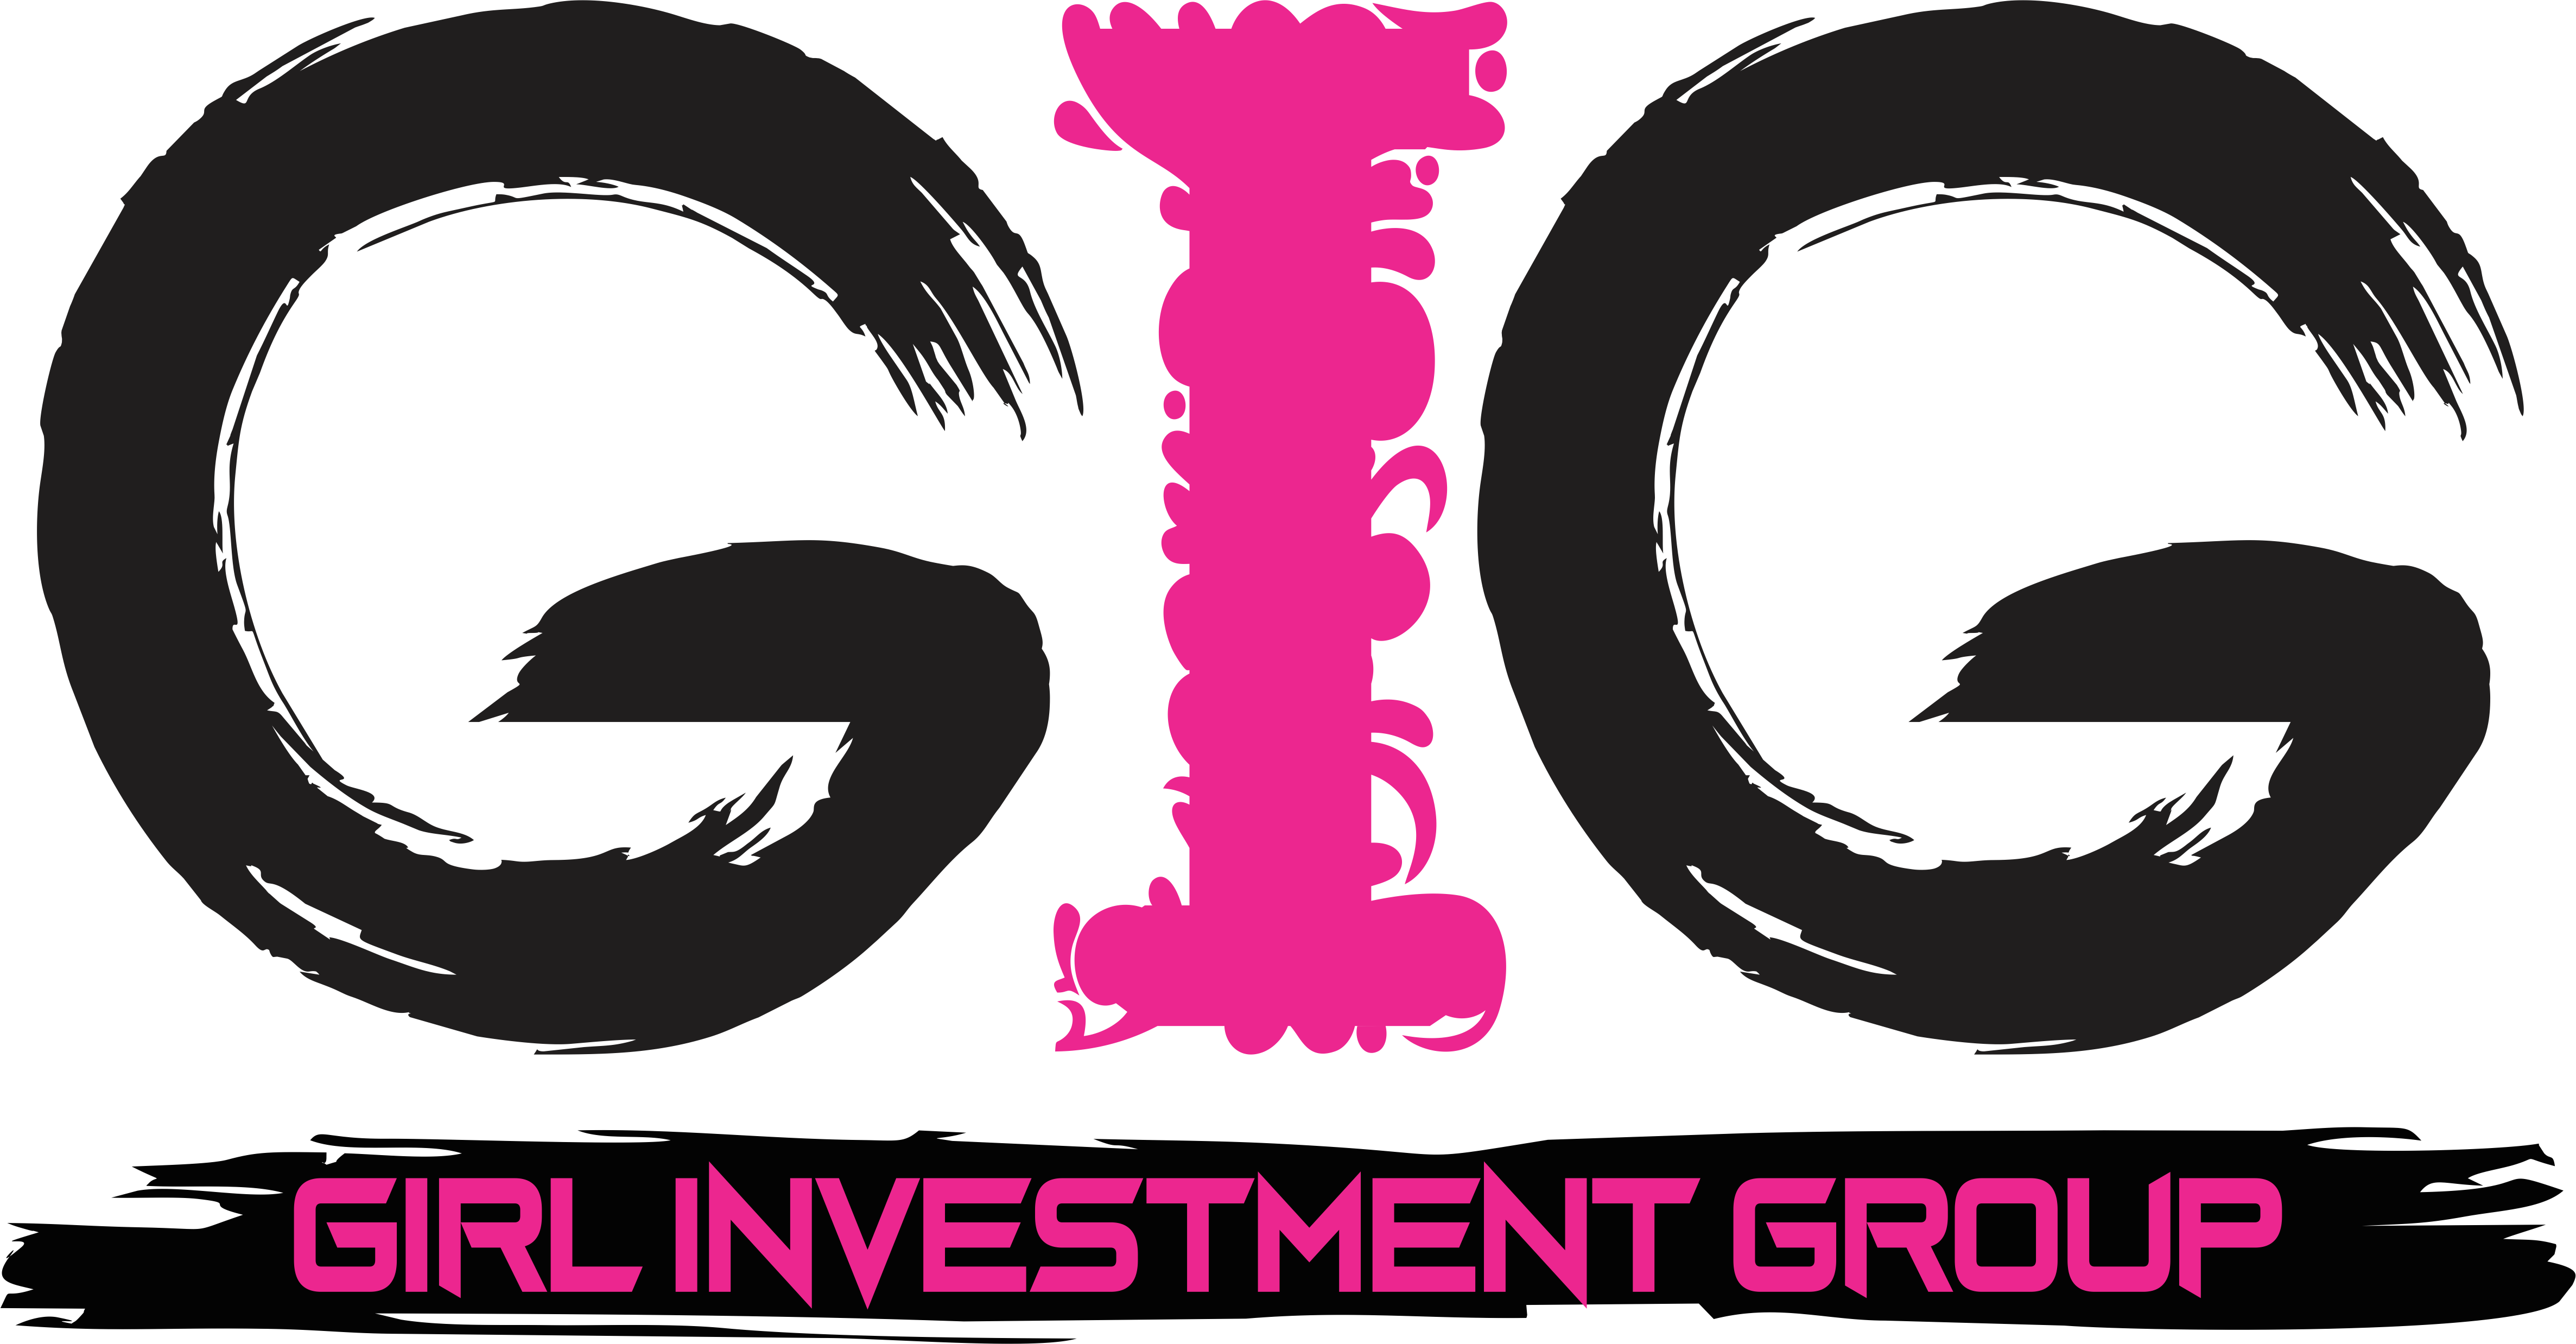 WELCOME TO  GIRL INVESTMENT GROUP